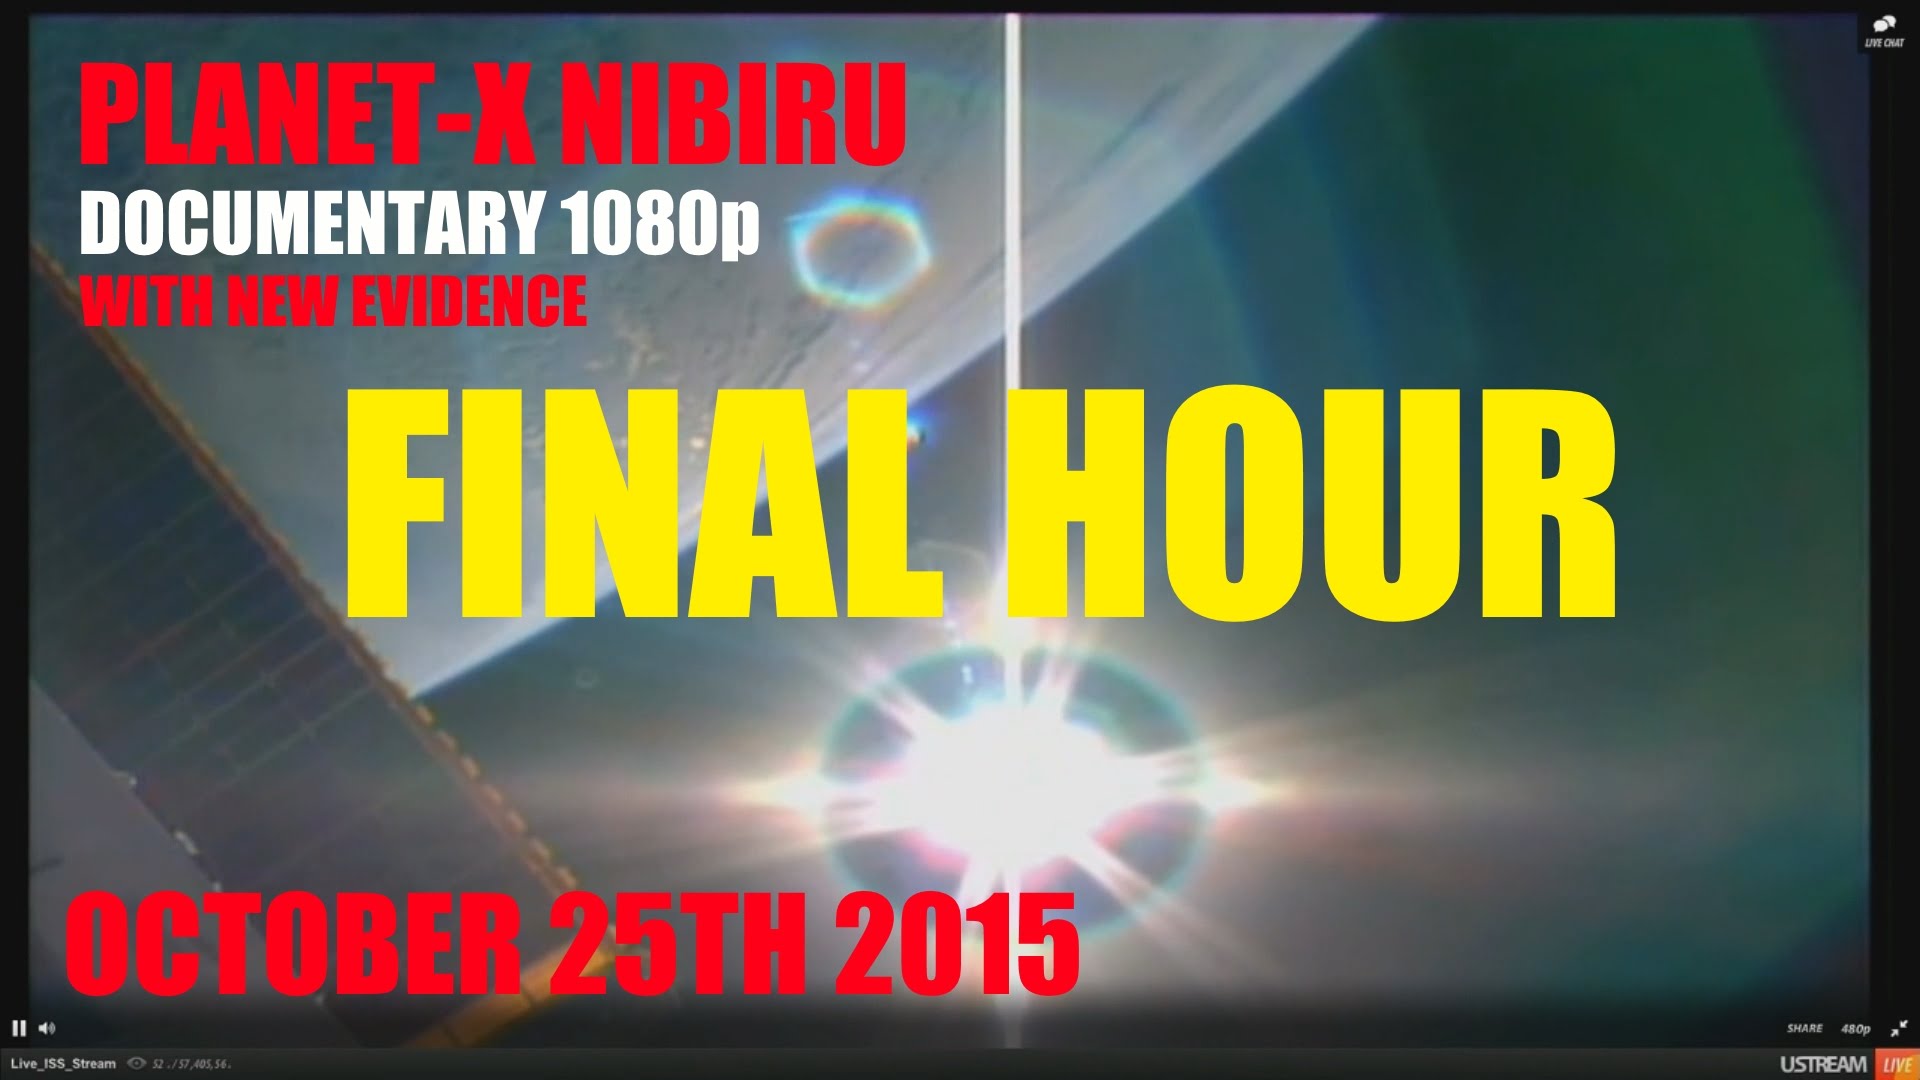 PLANET-X NIBIRU FINAL HOUR DOCUMENTARY 1080p OCTOBER 25TH 2015